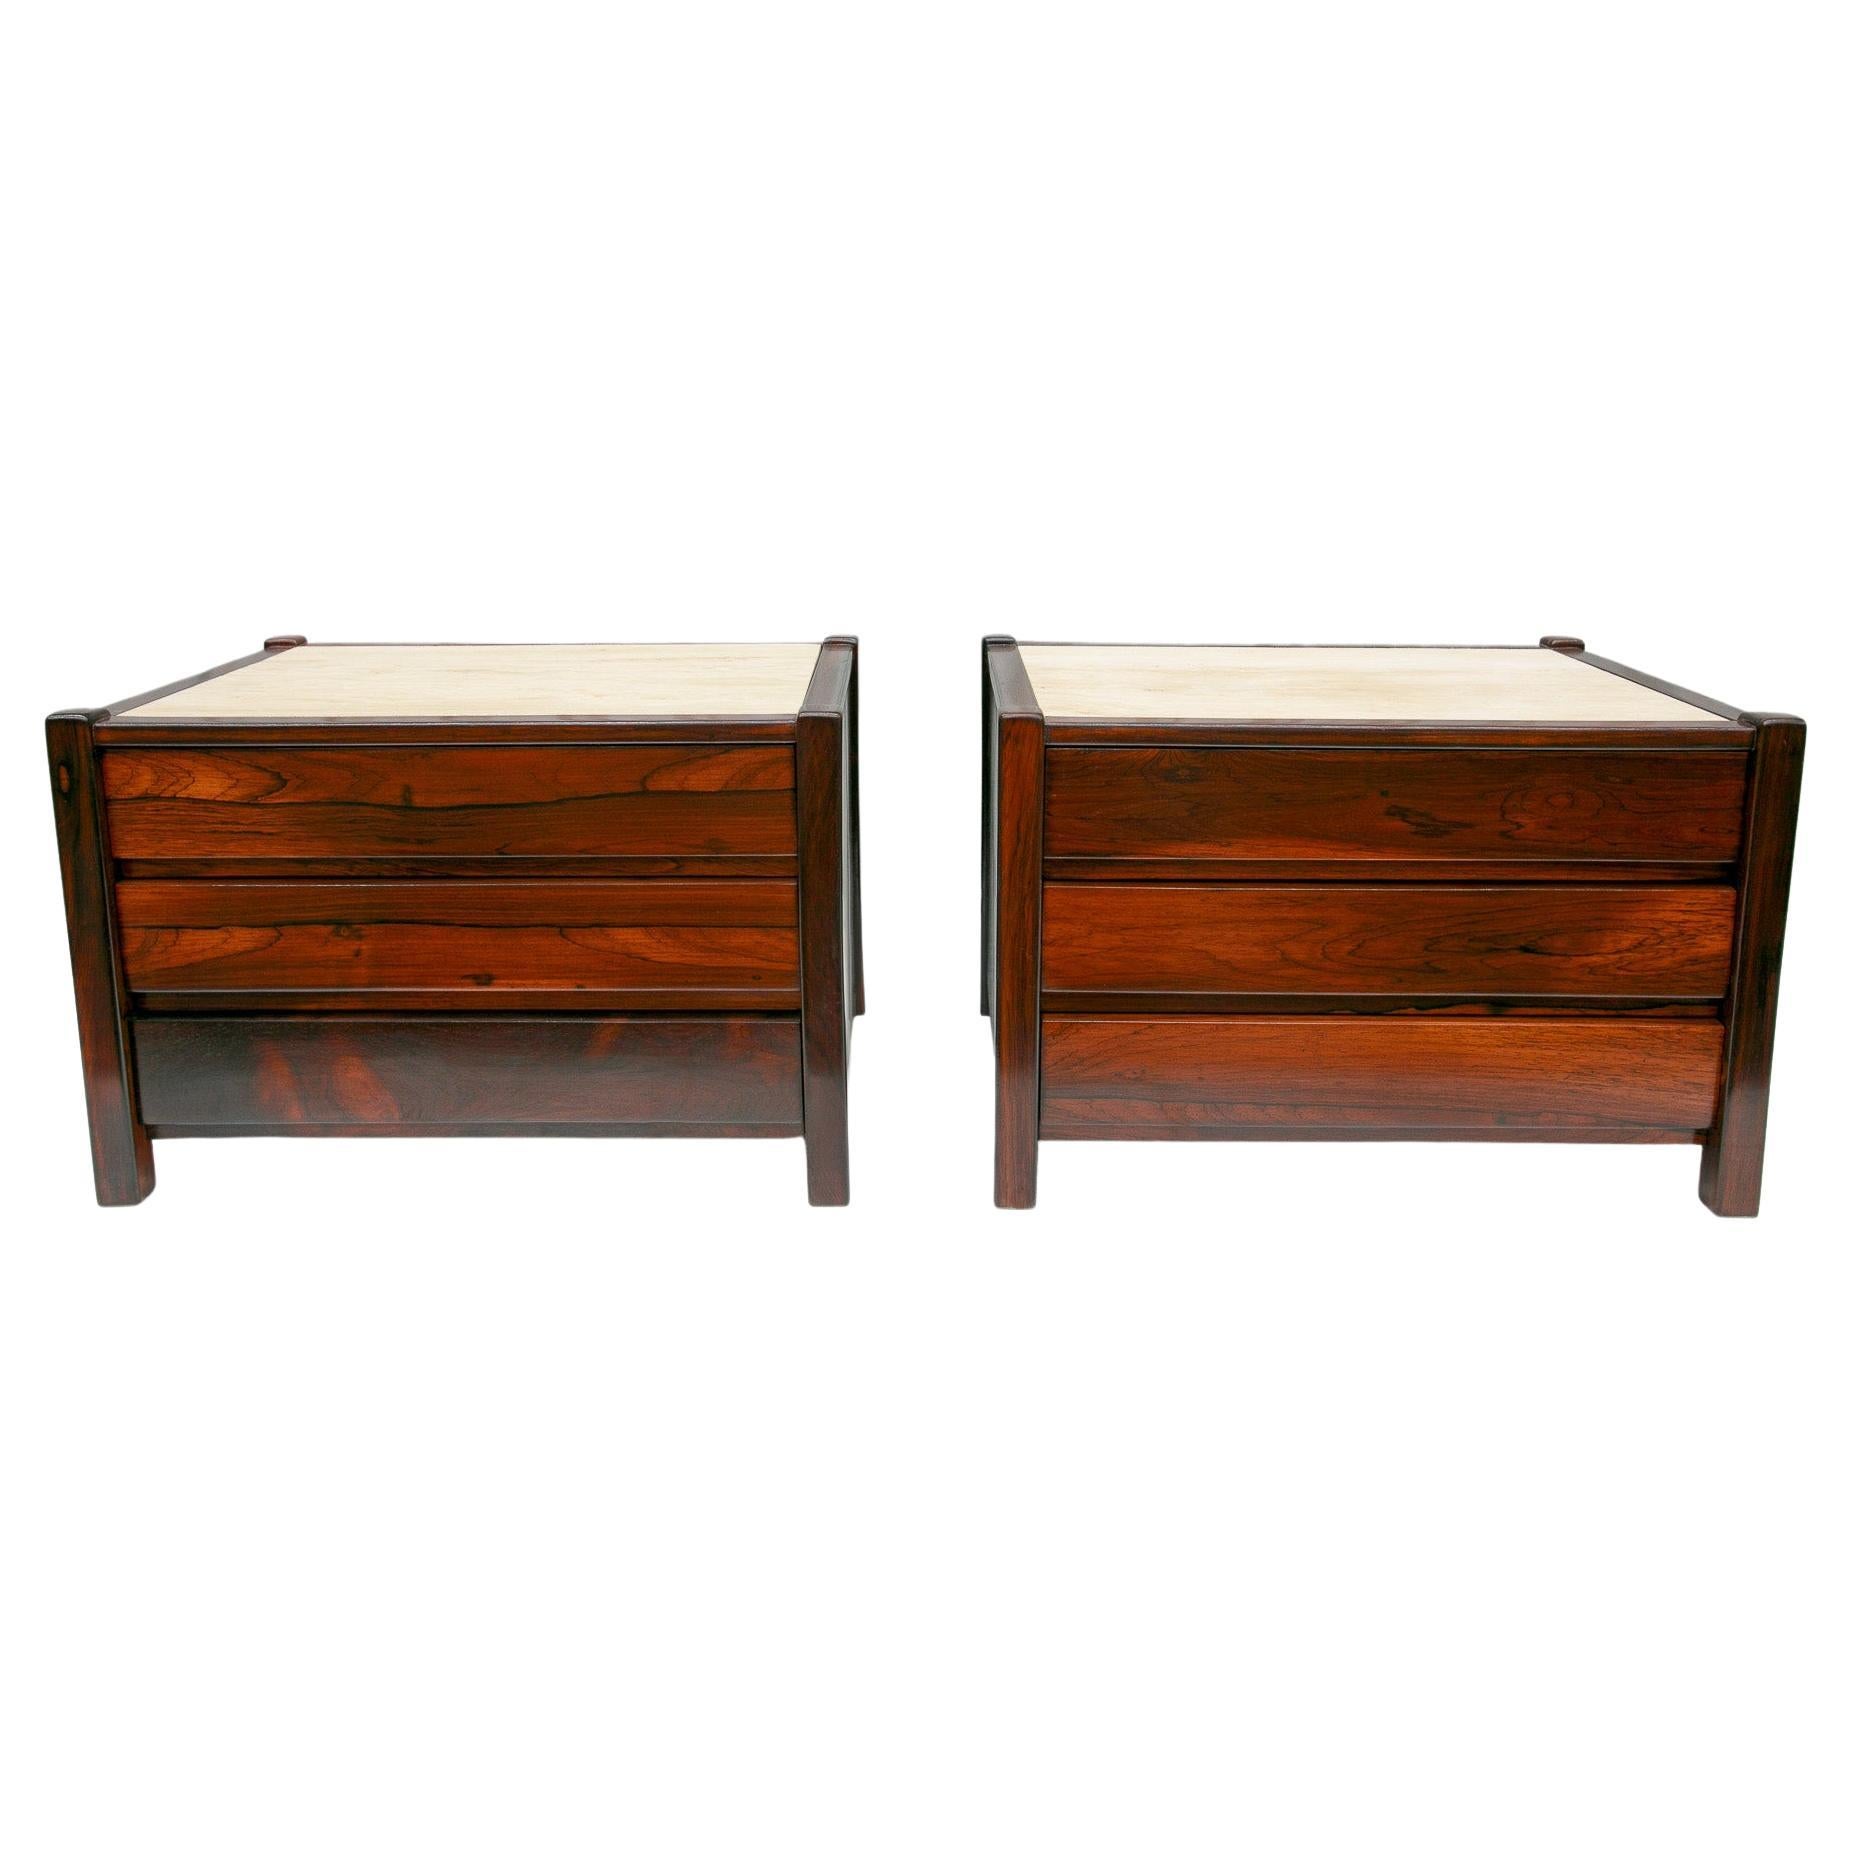 Available NOW, this Mid-Century Modern set of side tables in Travertine & Hardwood with drawers designed by Celina Decoracoes in the sixties are gorgeous!

Size: H15.7, W23.6, D17.7 (in) H40, W60, D45 (cm)

Each table is made of Brazilian